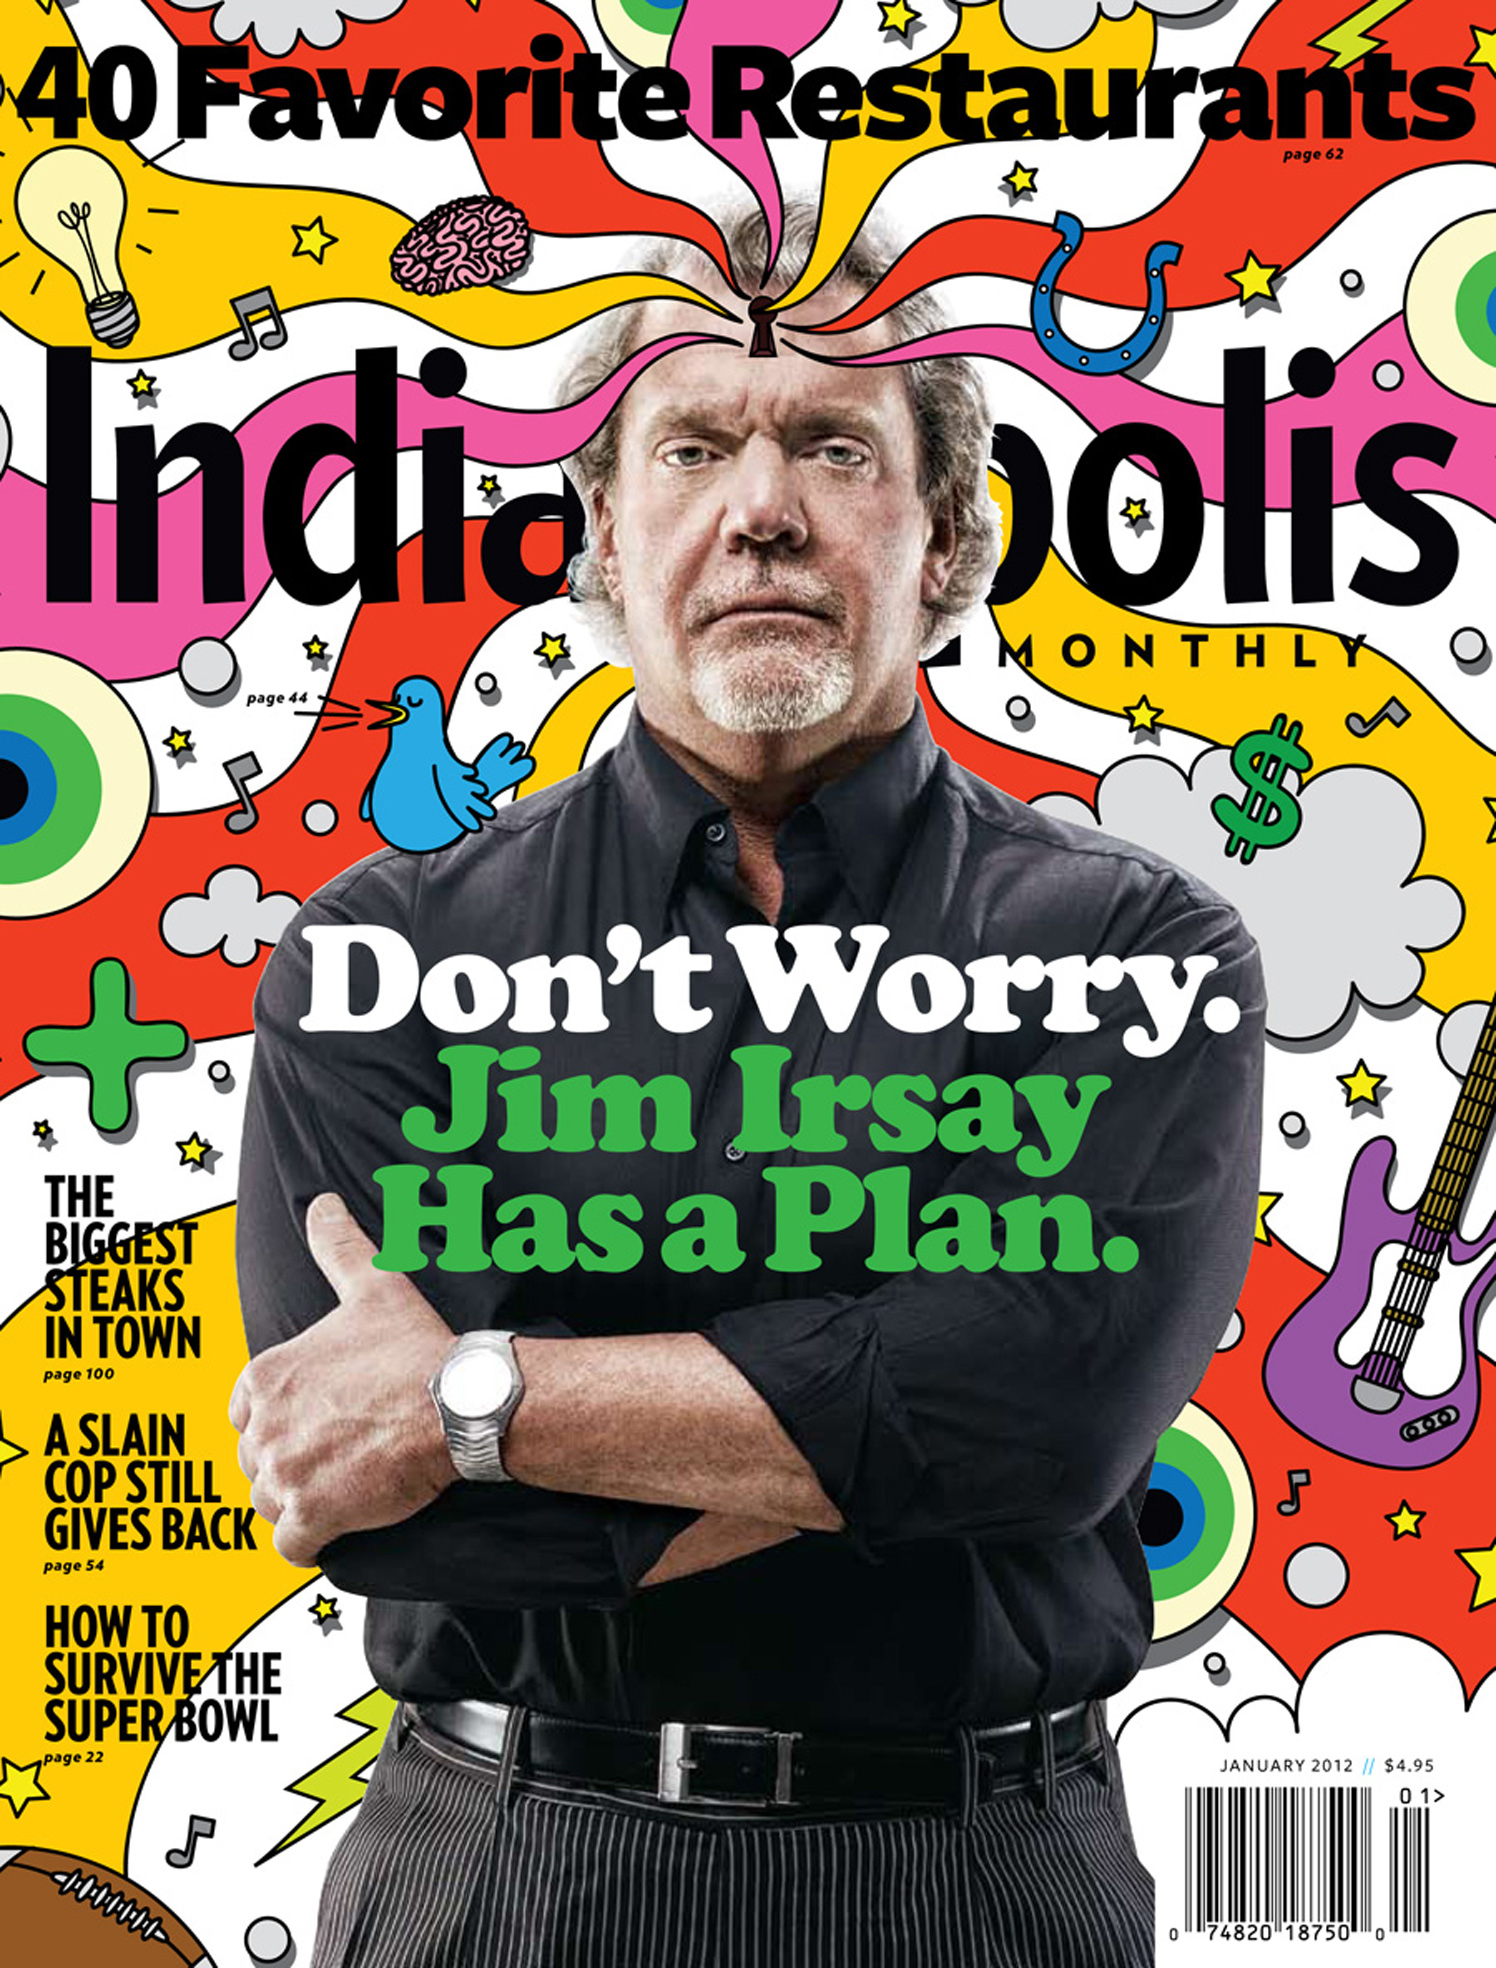 Don't Worry. Jim Irsay Has A Plan / Indianapolis Monthly